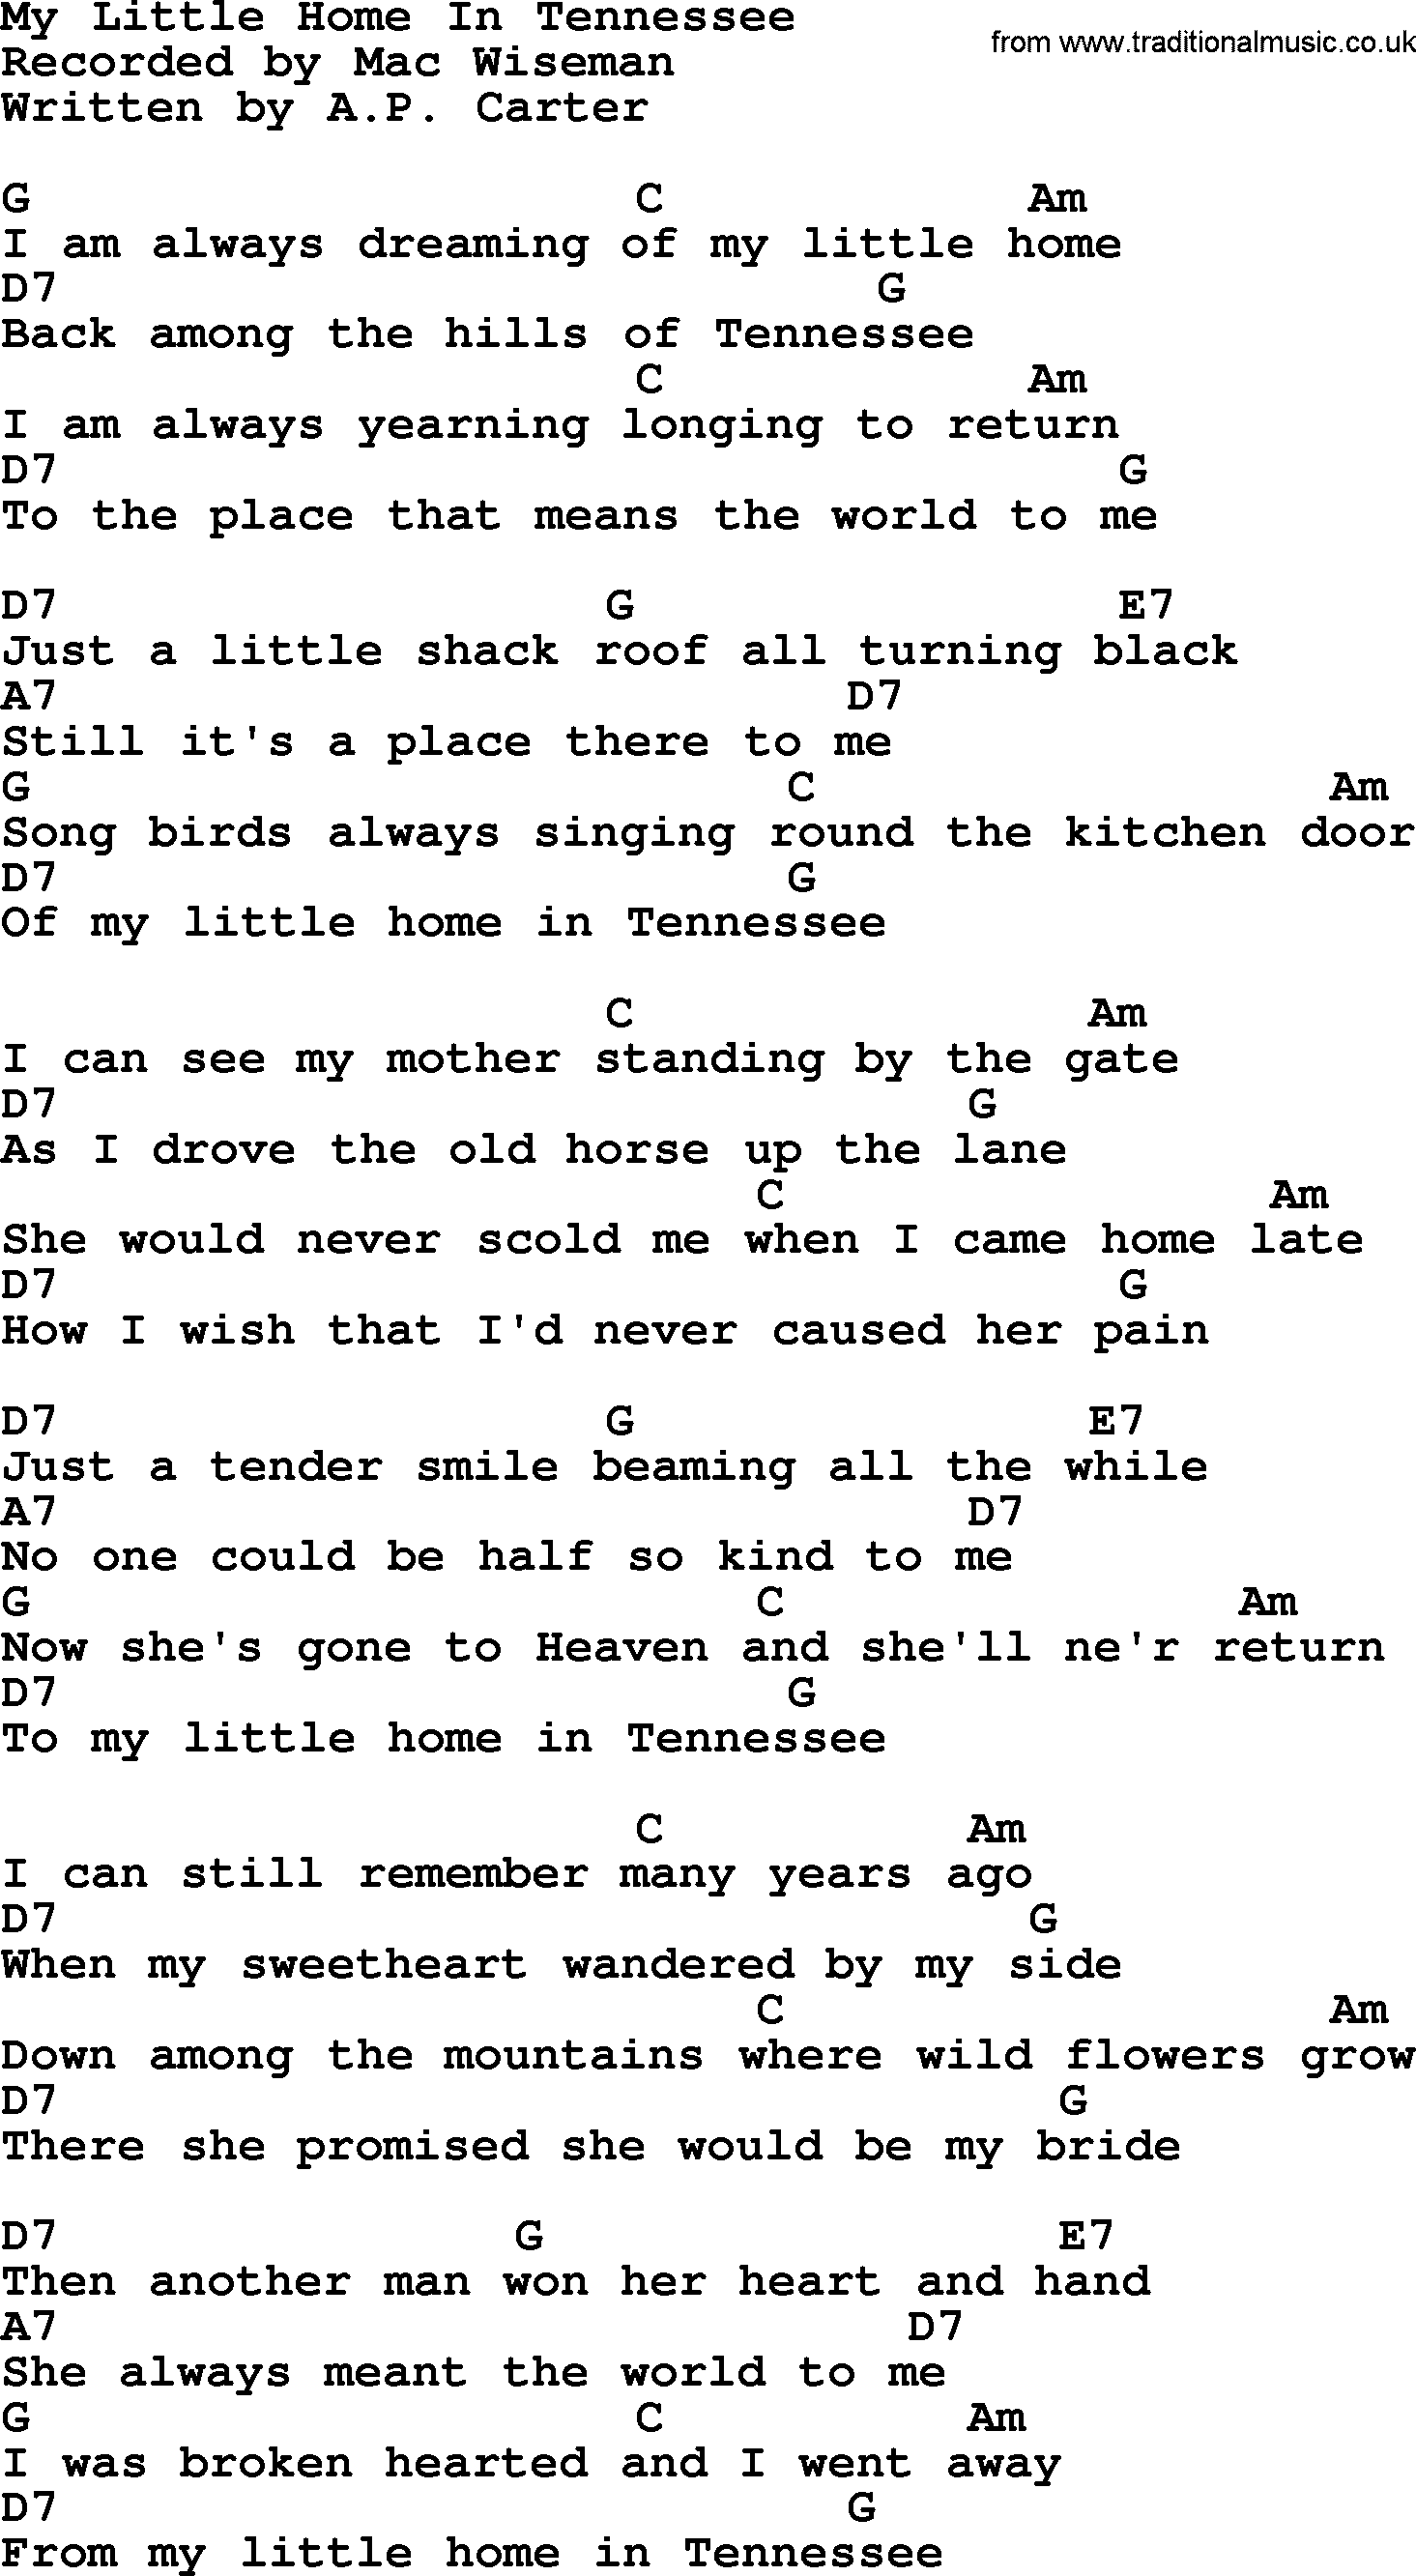 Bluegrass song: My Little Home In Tennessee, lyrics and chords